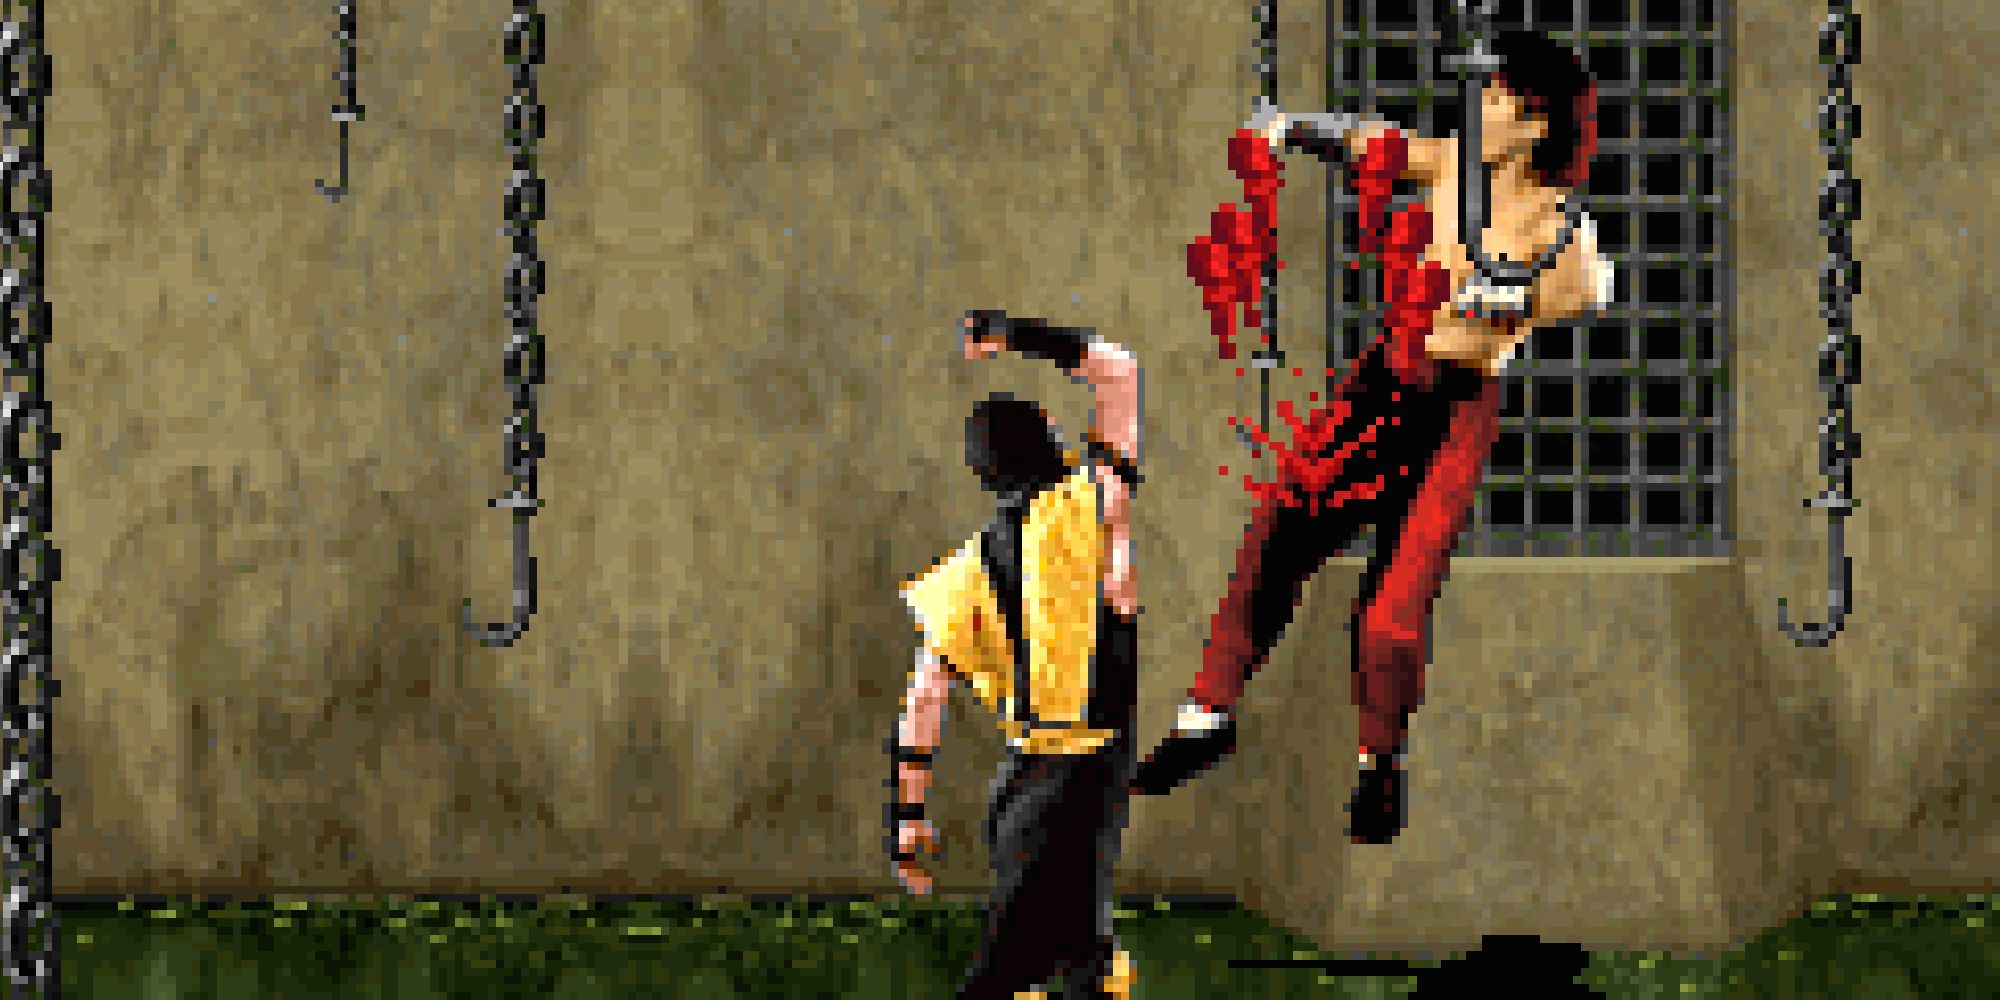 Scorpion punching another character in Mortal Kombat 2